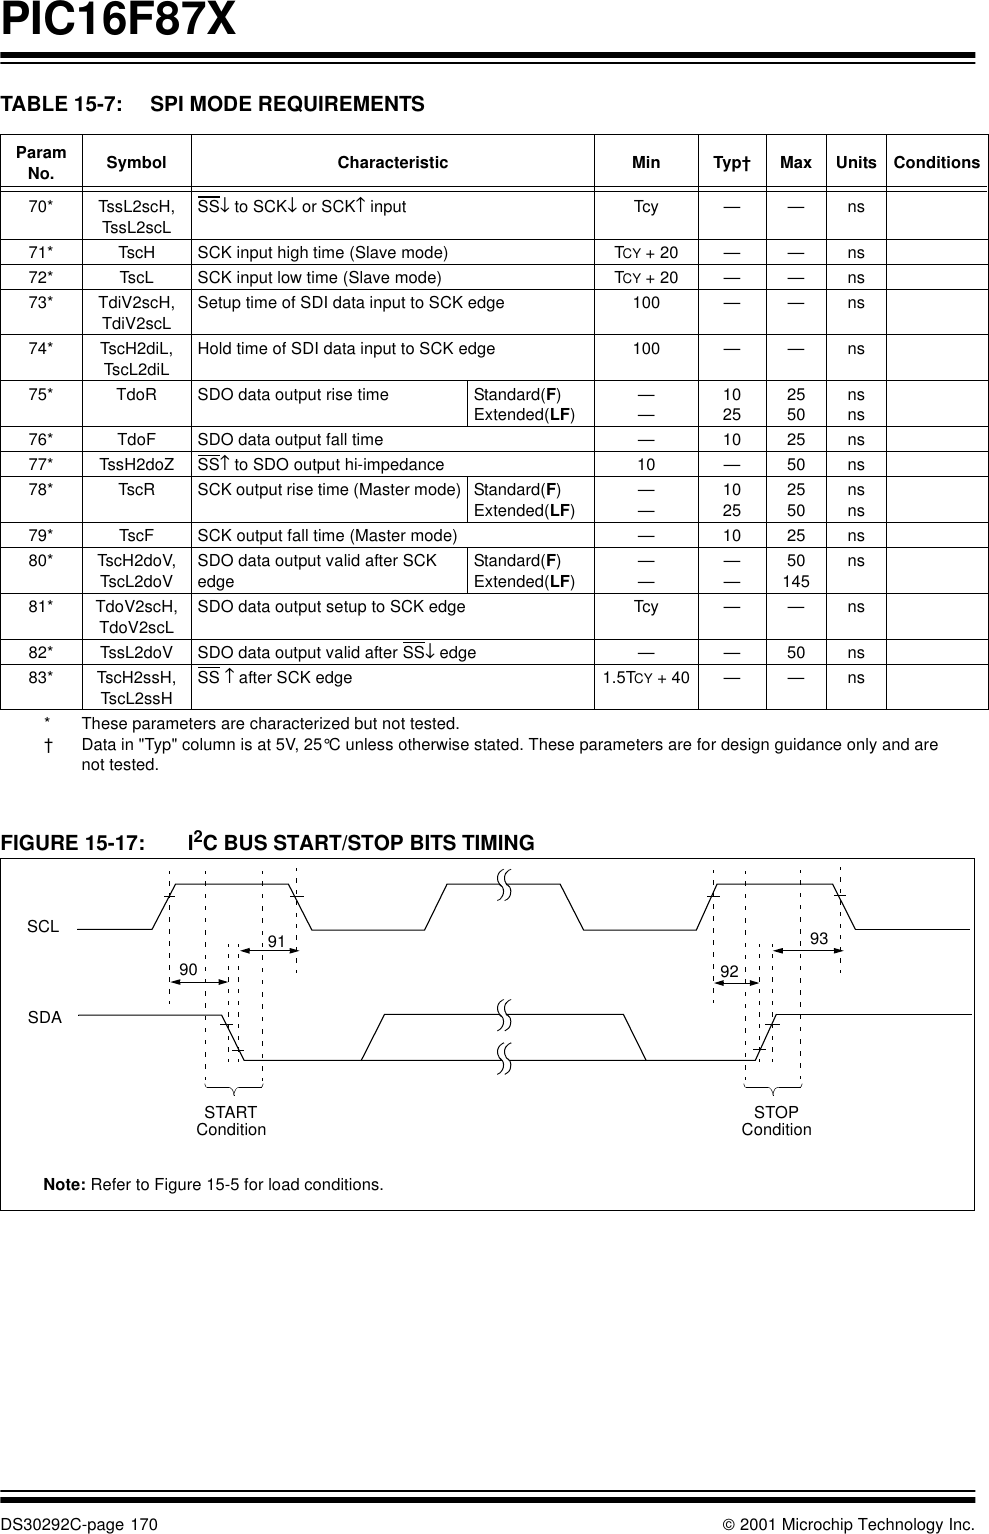 PIC16F87XDS30292C-page 170  2001 Microchip Technology Inc.TABLE 15-7: SPI MODE REQUIREMENTS   FIGURE 15-17: I2C BUS START/STOP BITS TIMINGParam No. Symbol Characteristic Min Typ†Max Units Conditions70* TssL2scH, TssL2scLSS↓ to SCK↓ or SCK↑ input Tcy ——ns71* TscH SCK input high time (Slave mode) TCY + 20 ——ns72* TscL SCK input low time (Slave mode) TCY + 20 ——ns73* TdiV2scH, TdiV2scLSetup time of SDI data input to SCK edge 100 ——ns74* TscH2diL, TscL2diLHold time of SDI data input to SCK edge 100 ——ns75* TdoR SDO data output rise time Standard(F)Extended(LF)——10252550nsns76* TdoF SDO data output fall time —10 25 ns77* TssH2doZ SS↑ to SDO output hi-impedance  10 —50 ns78* TscR SCK output rise time (Master mode) Standard(F)Extended(LF)——10252550nsns79* TscF SCK output fall time (Master mode) —10 25 ns80* TscH2doV,TscL2doVSDO data output valid after SCK edgeStandard(F)Extended(LF)————50145ns81* TdoV2scH,TdoV2scLSDO data output setup to SCK edge Tcy ——ns82* TssL2doV SDO data output valid after SS↓ edge ——50 ns83* TscH2ssH,TscL2ssHSS ↑ after SCK edge 1.5TCY + 40 ——ns* These parameters are characterized but not tested.†Data in &quot;Typ&quot; column is at 5V, 25°C unless otherwise stated. These parameters are for design guidance only and are not tested.Note: Refer to Figure 15-5 for load conditions.91 93SCLSDASTARTCondition STOPCondition90 92